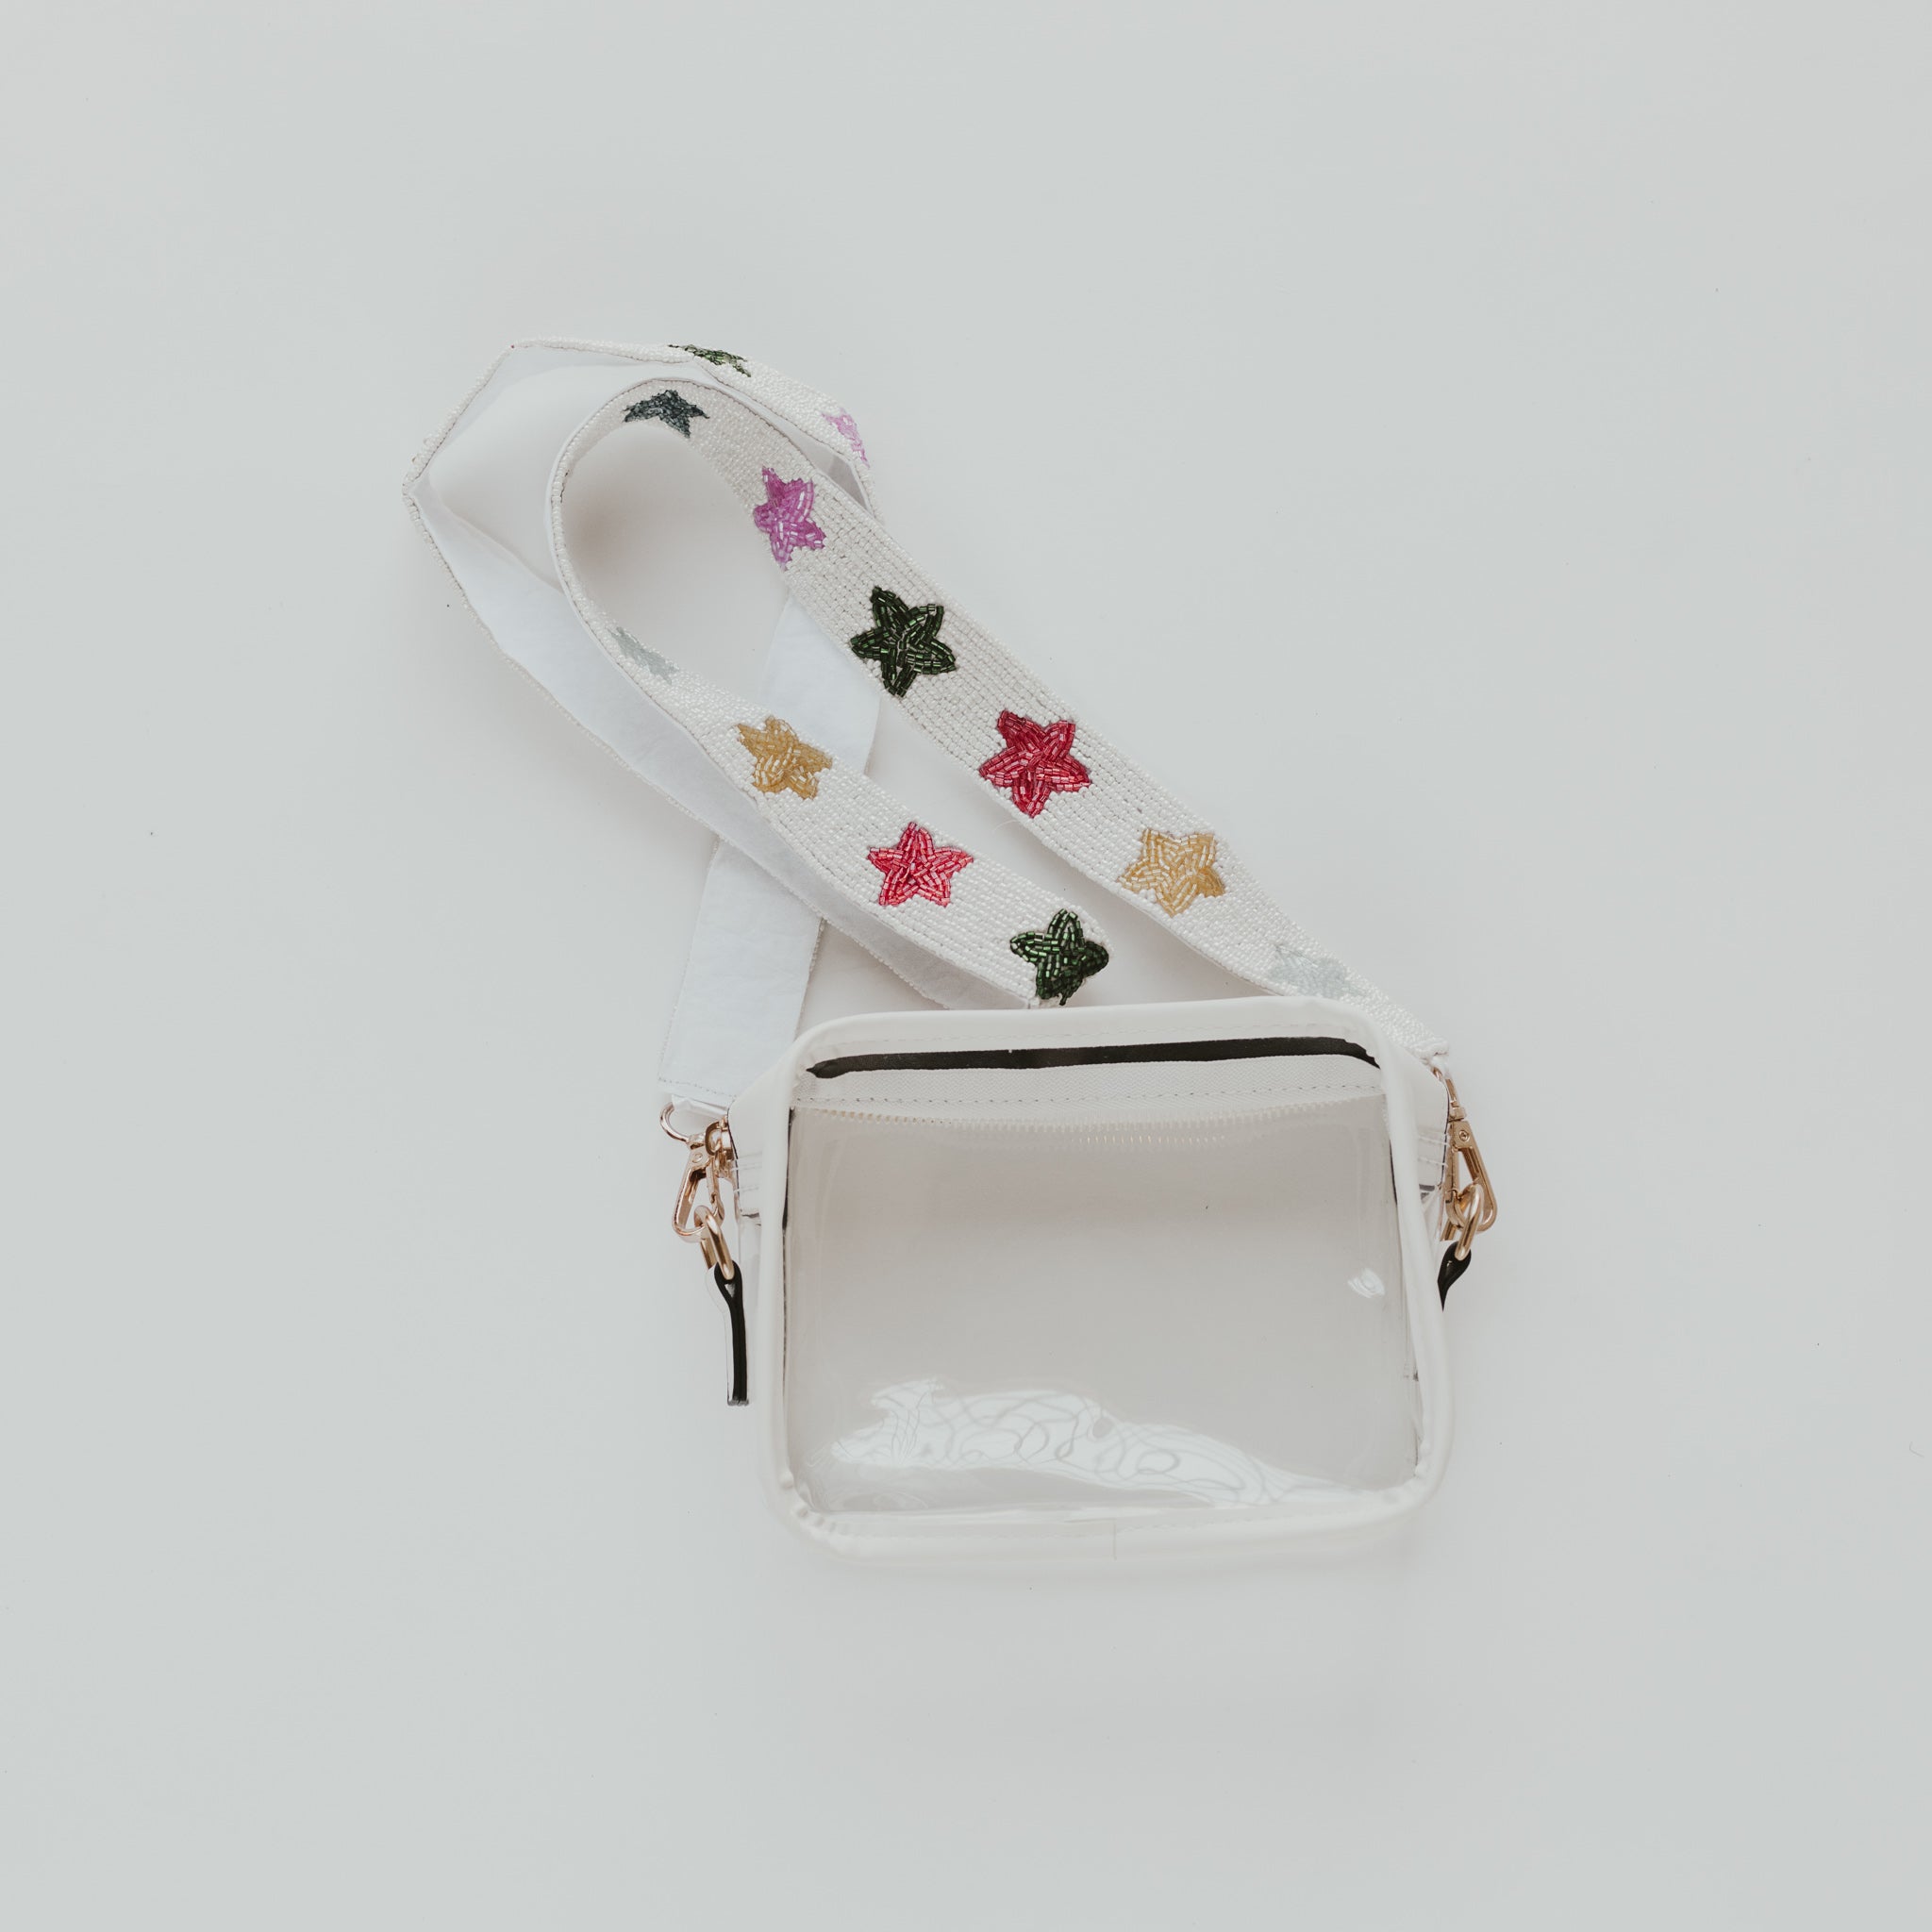 A clear purse with white lining and a white beaded bag strap with rainbow beaded stars along the length of the strap against a white background